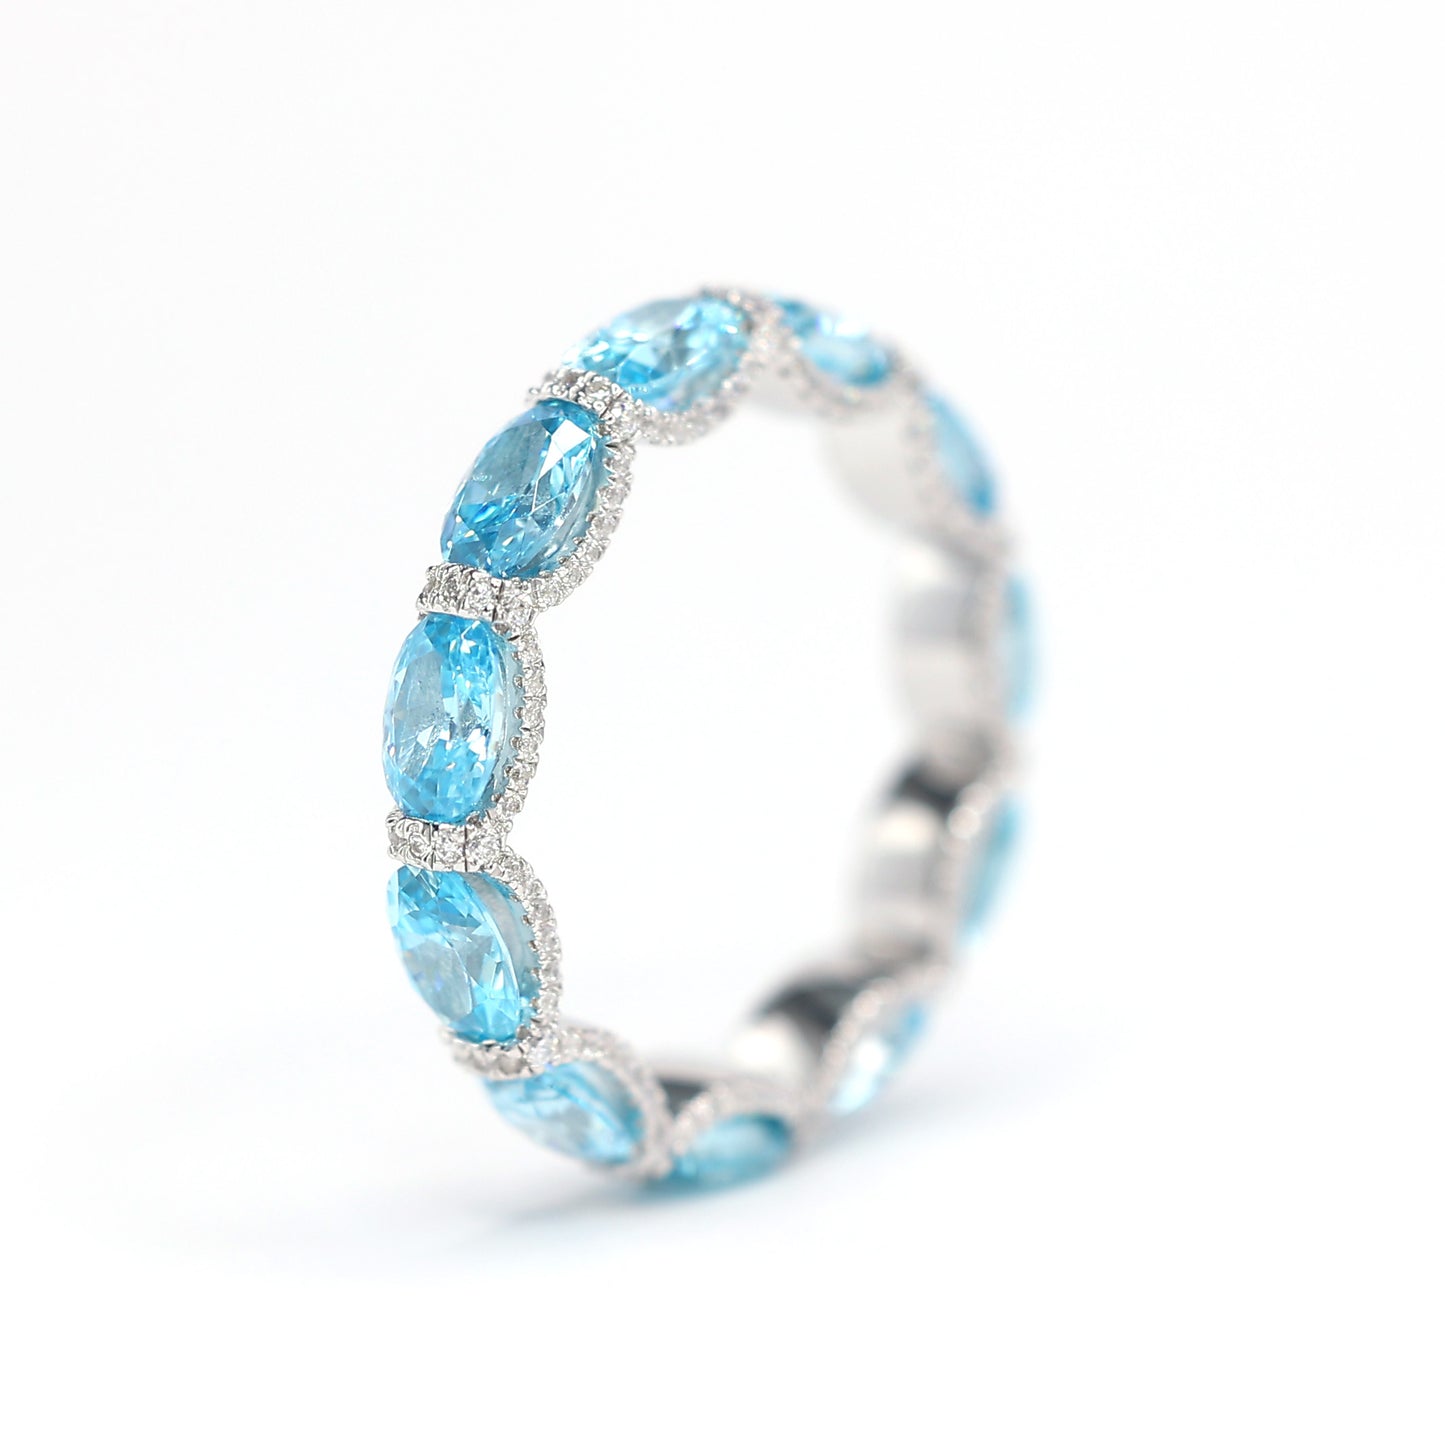 Micro-setting Aquamarine color Lab created stones detailed band ring, sterling silver. (7.5 carat)